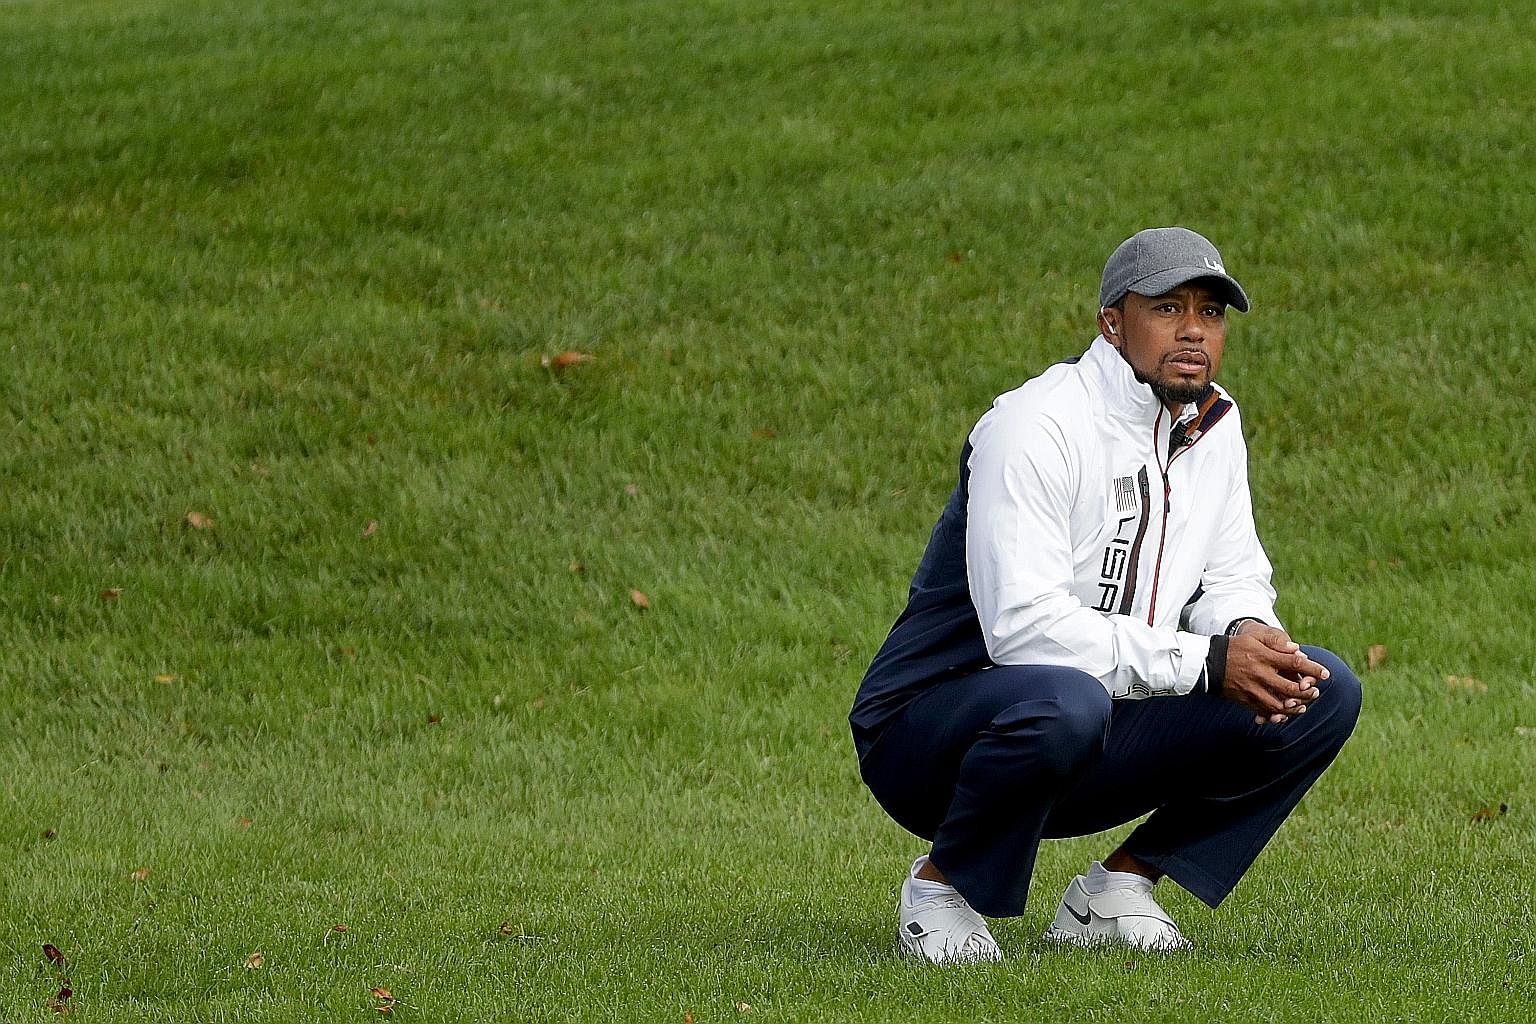 US vice-captain Tiger Woods looks on during this year's Ryder Cup at Hazeltine National Golf Club. The 14-time Major champion has not played tournament golf since August last year and has not won on the PGA Tour since 2013.